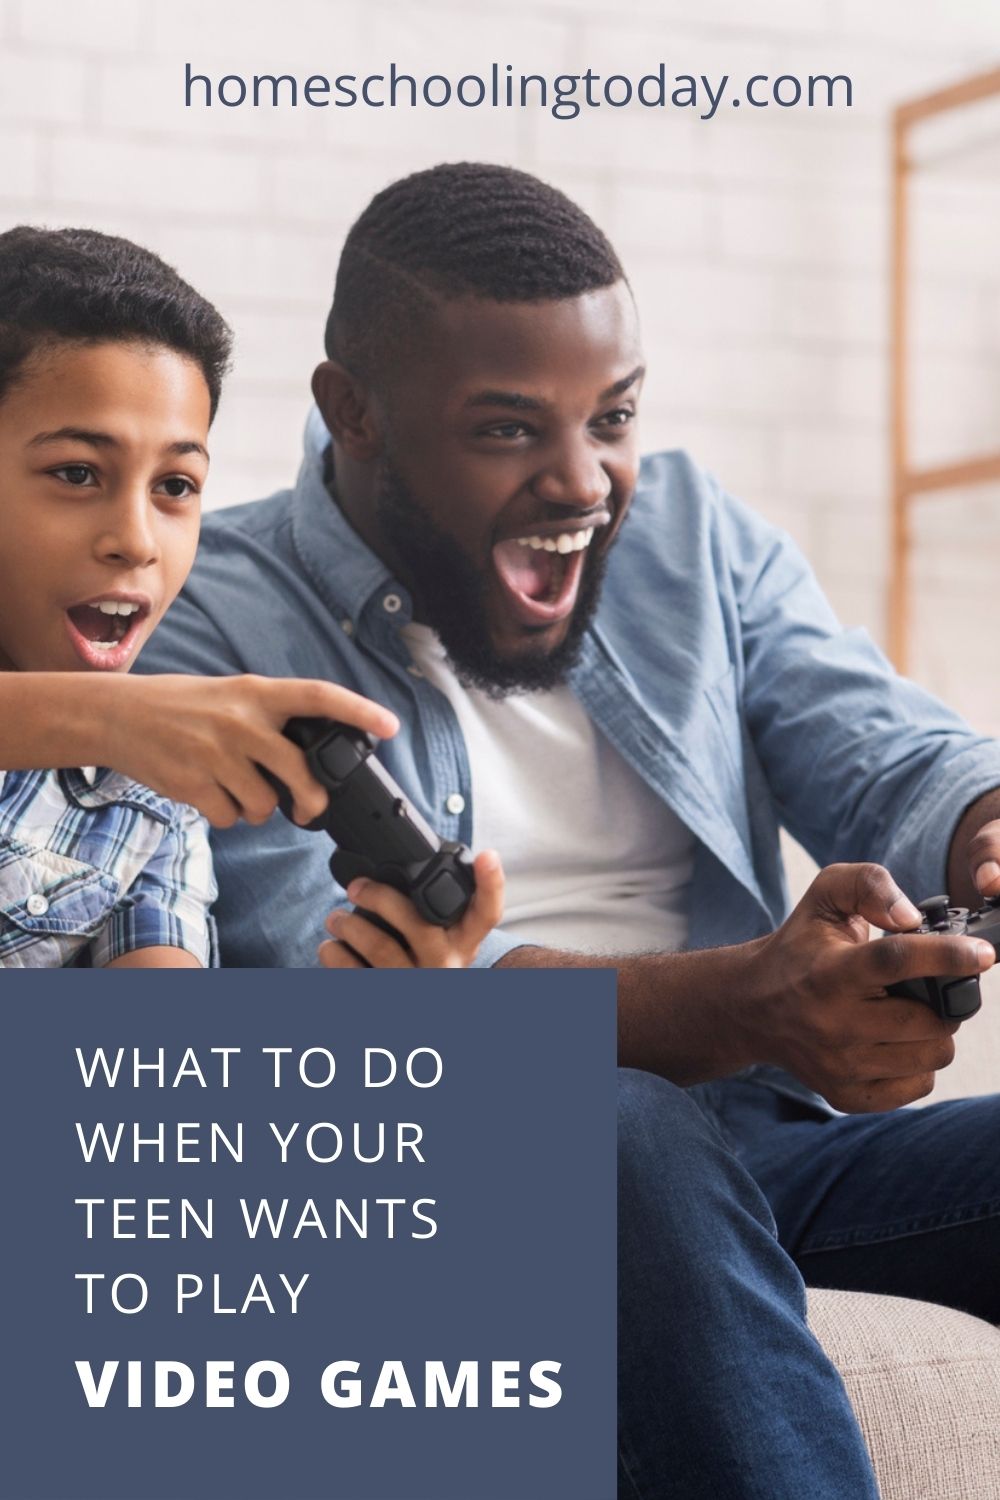 Pinterest pin showing a father and son playing video games together